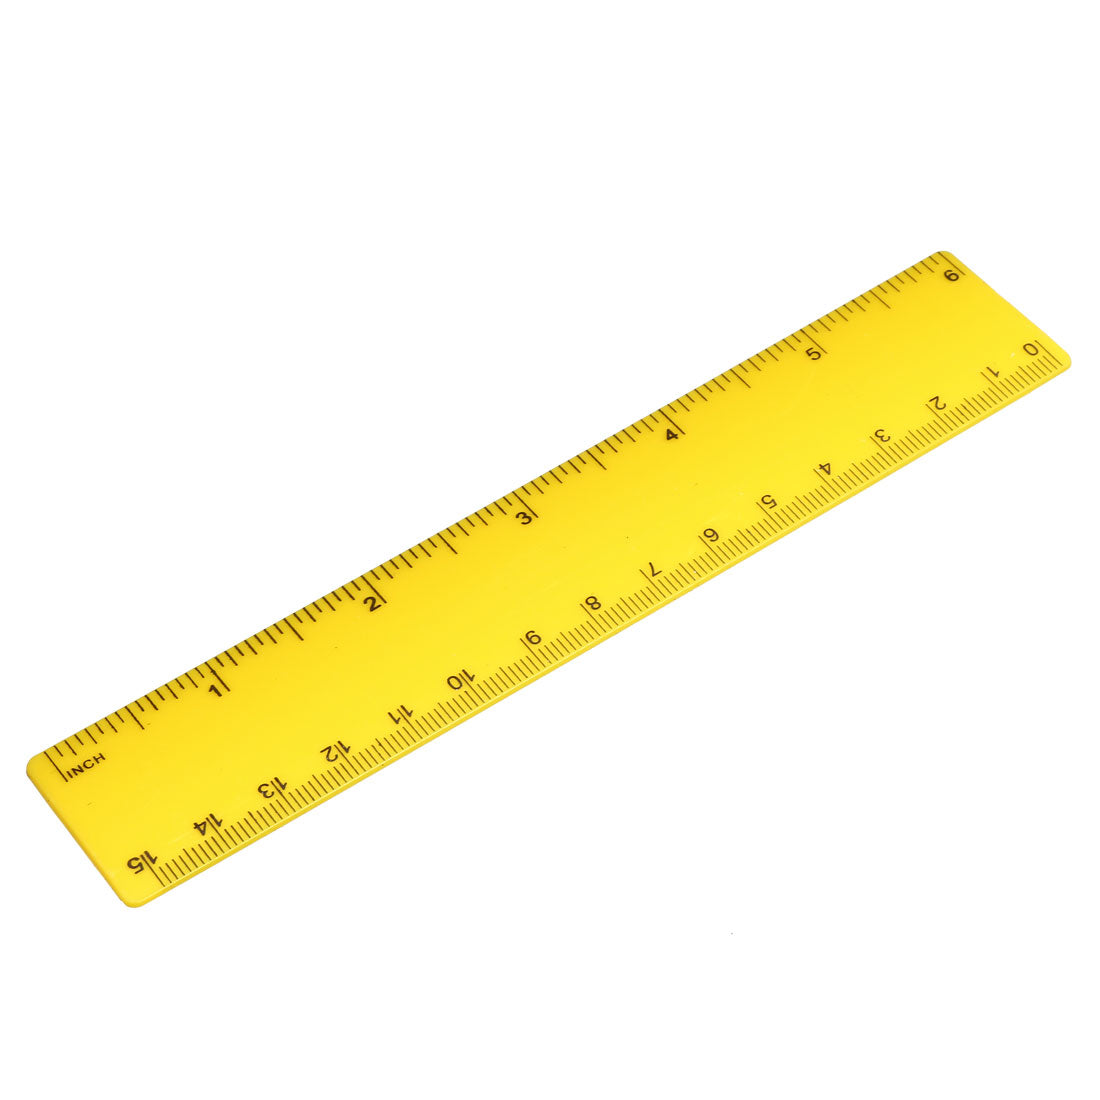 uxcell Uxcell Plastic Ruler 15cm 6 inches Straight Ruler Yellow Measuring Tool